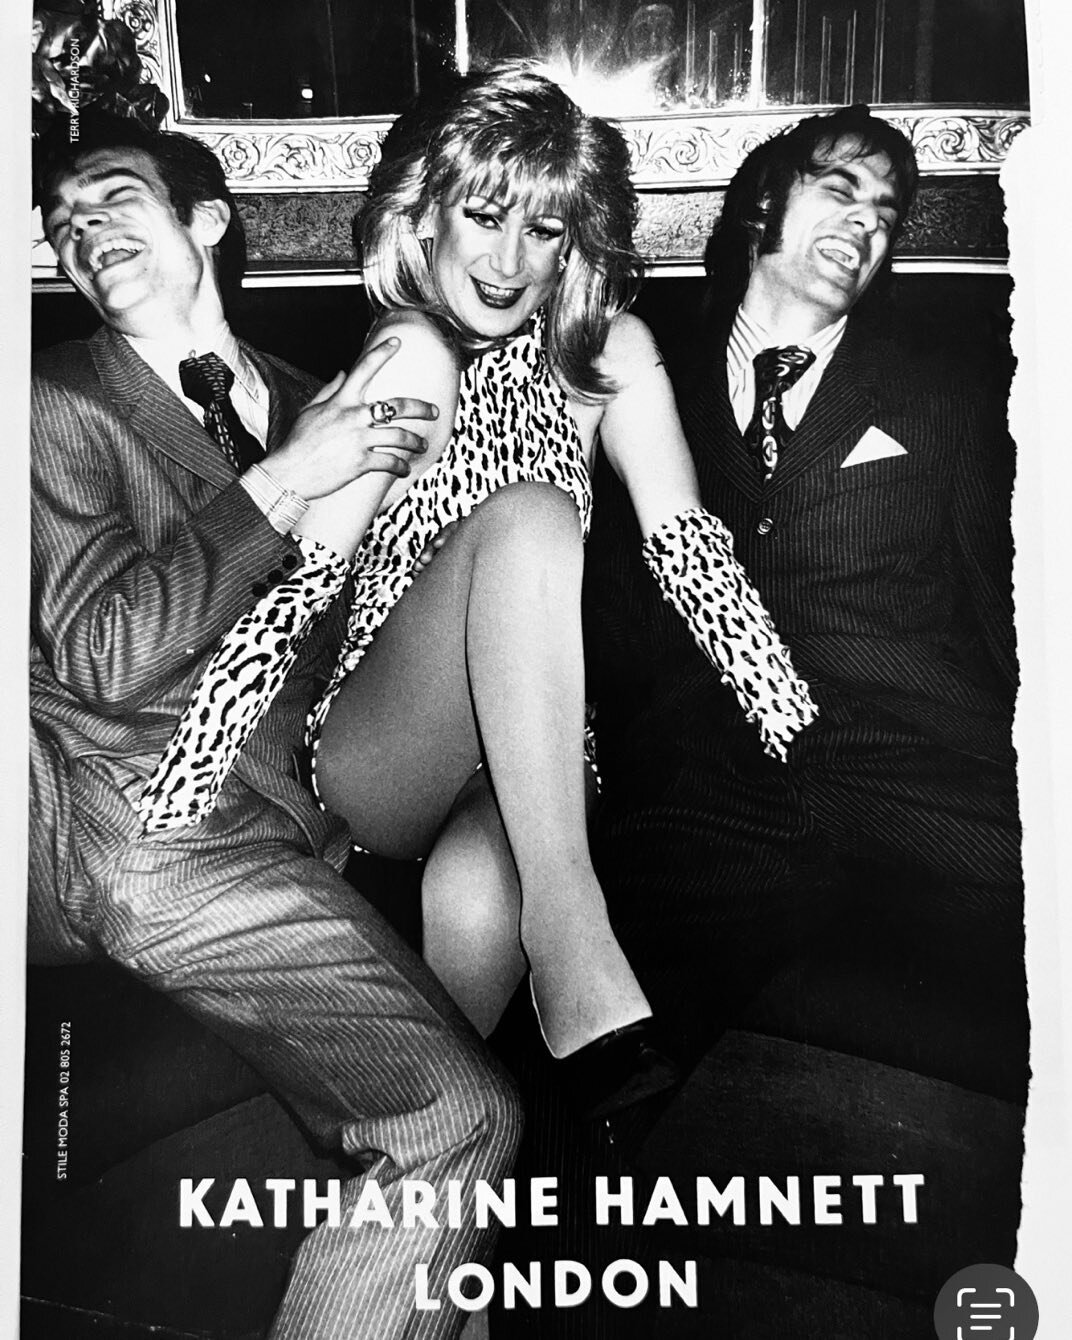 We&rsquo;re digitizing our magazine tear archive and came across this gem from the late 90&rsquo;s by the indomitable @katharinehamnett I think shot by @terryrichardson great ad! ❤️
.
.
.
#advertising #katharinehamnett #terryrichardson #blackandwhite